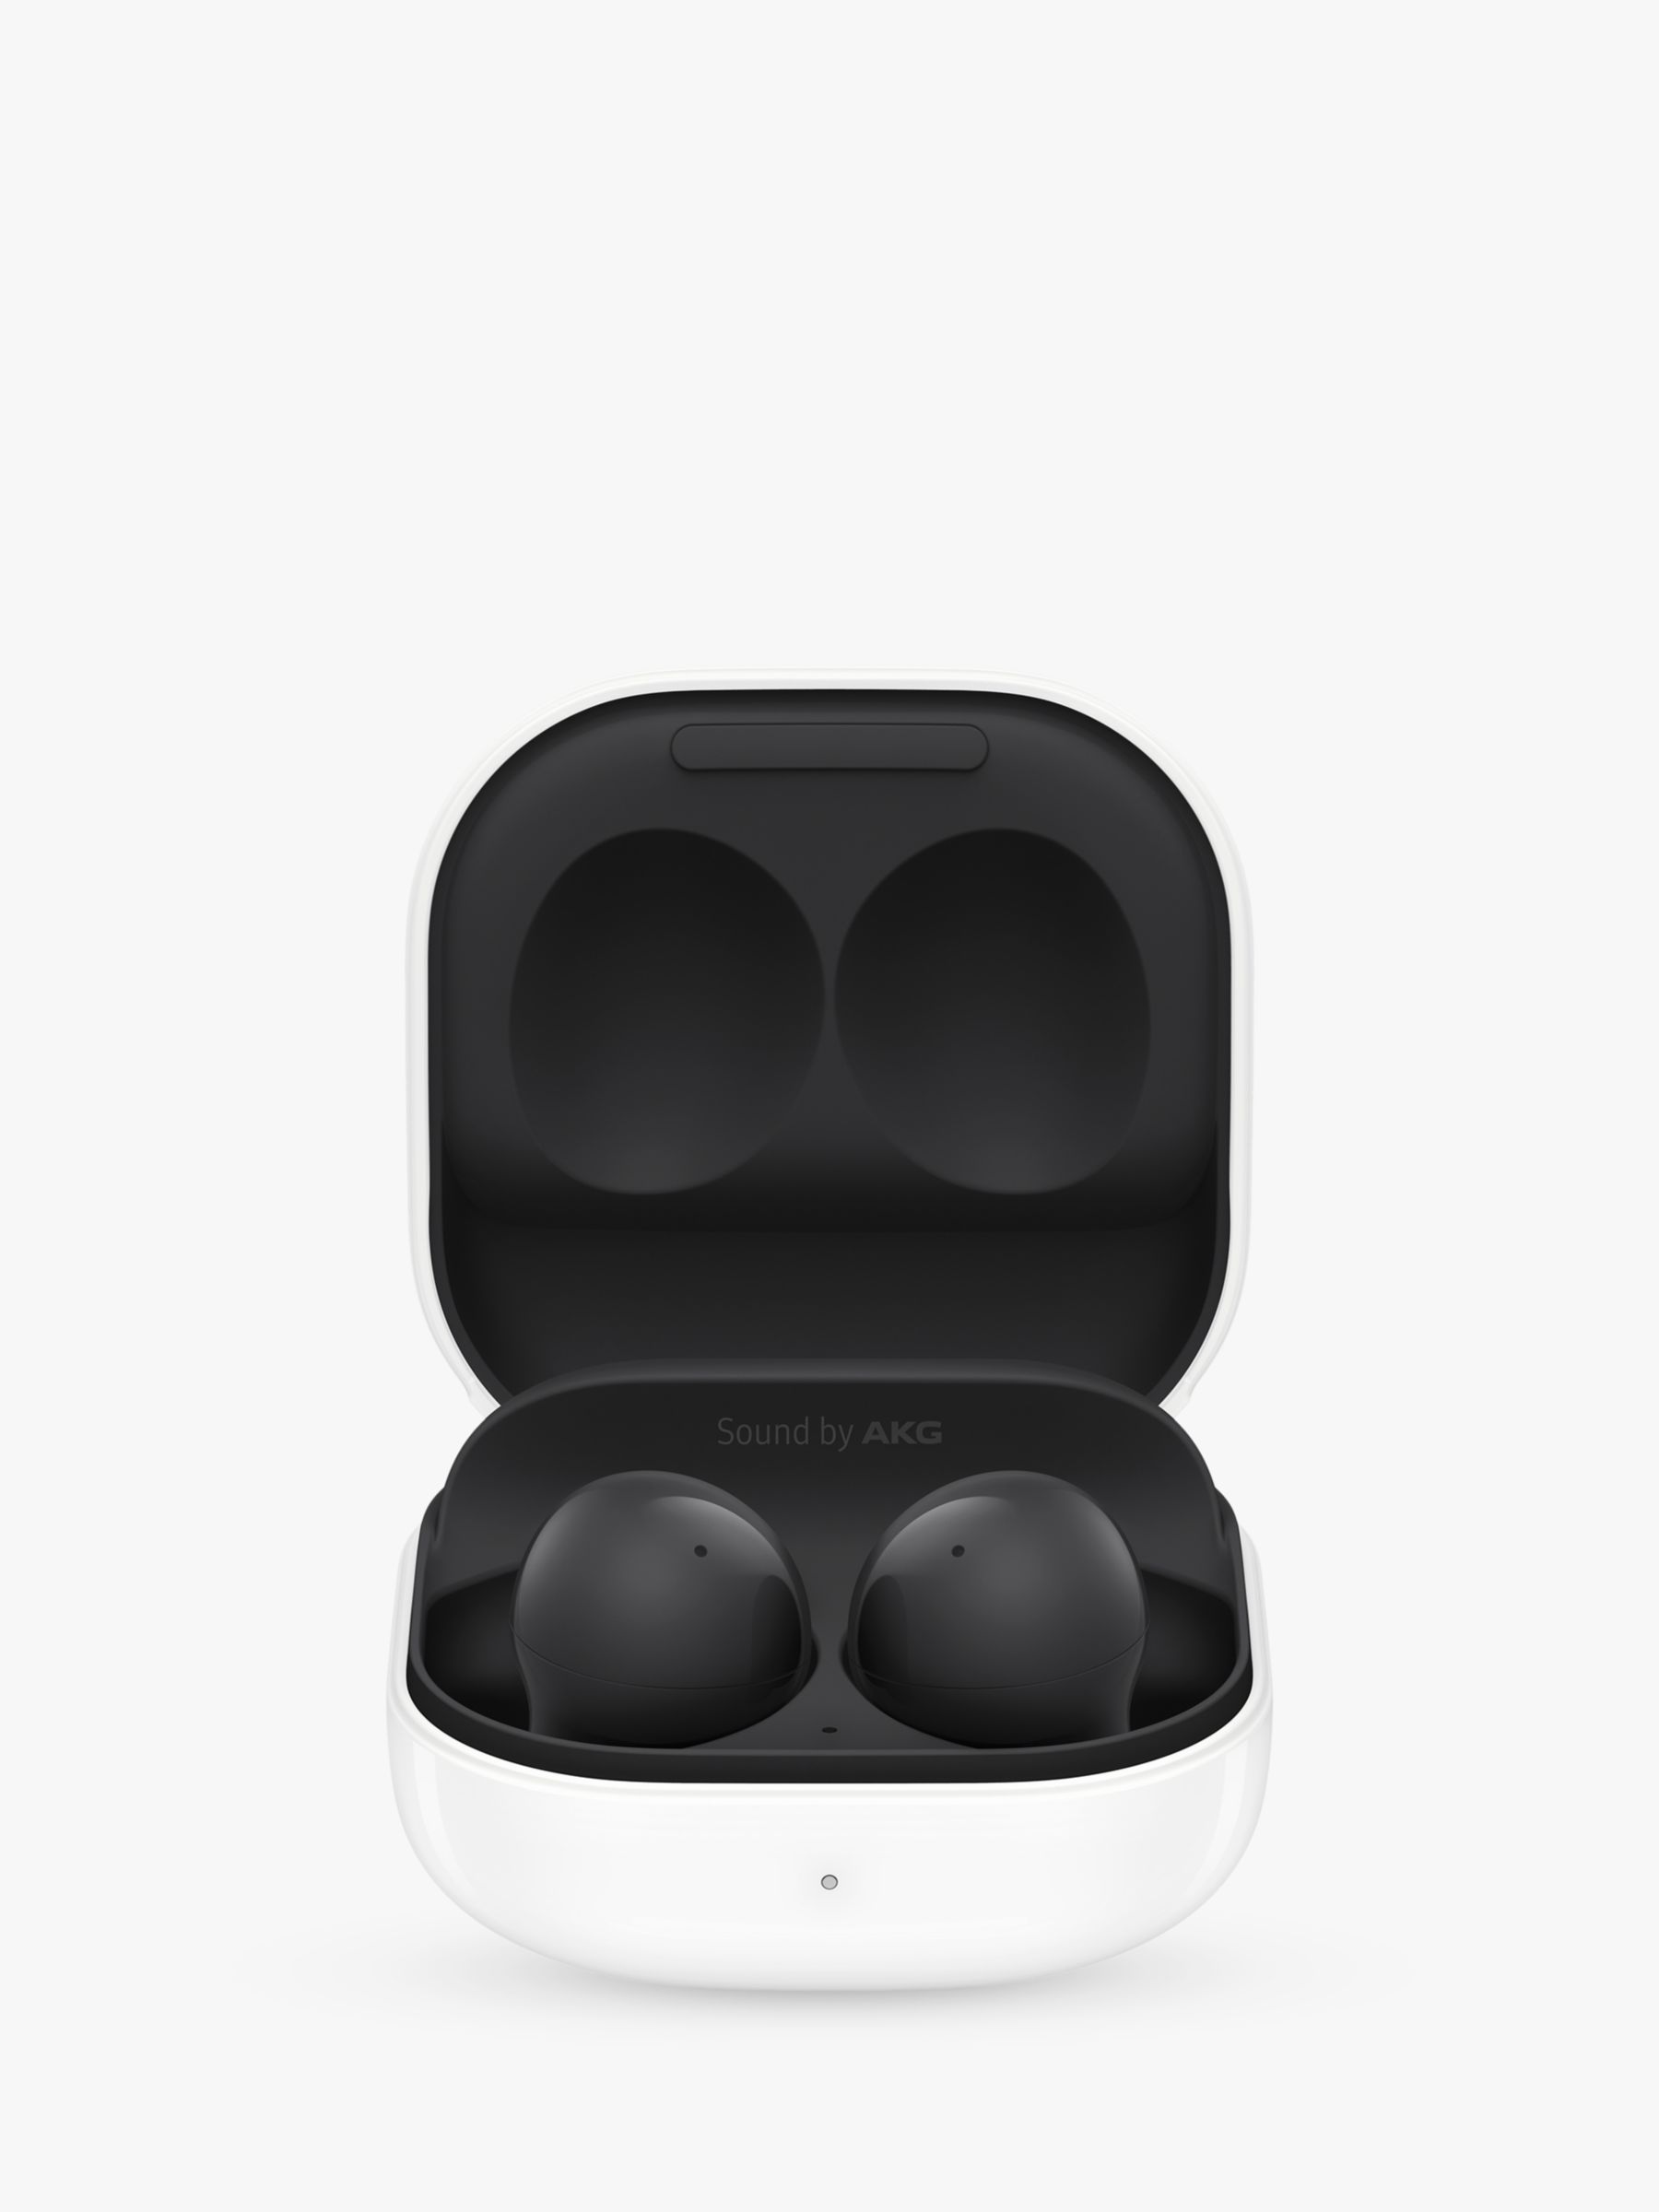 Samsung Galaxy Buds2 True Wireless Earbuds with Active Noise Cancellation,  Graphite